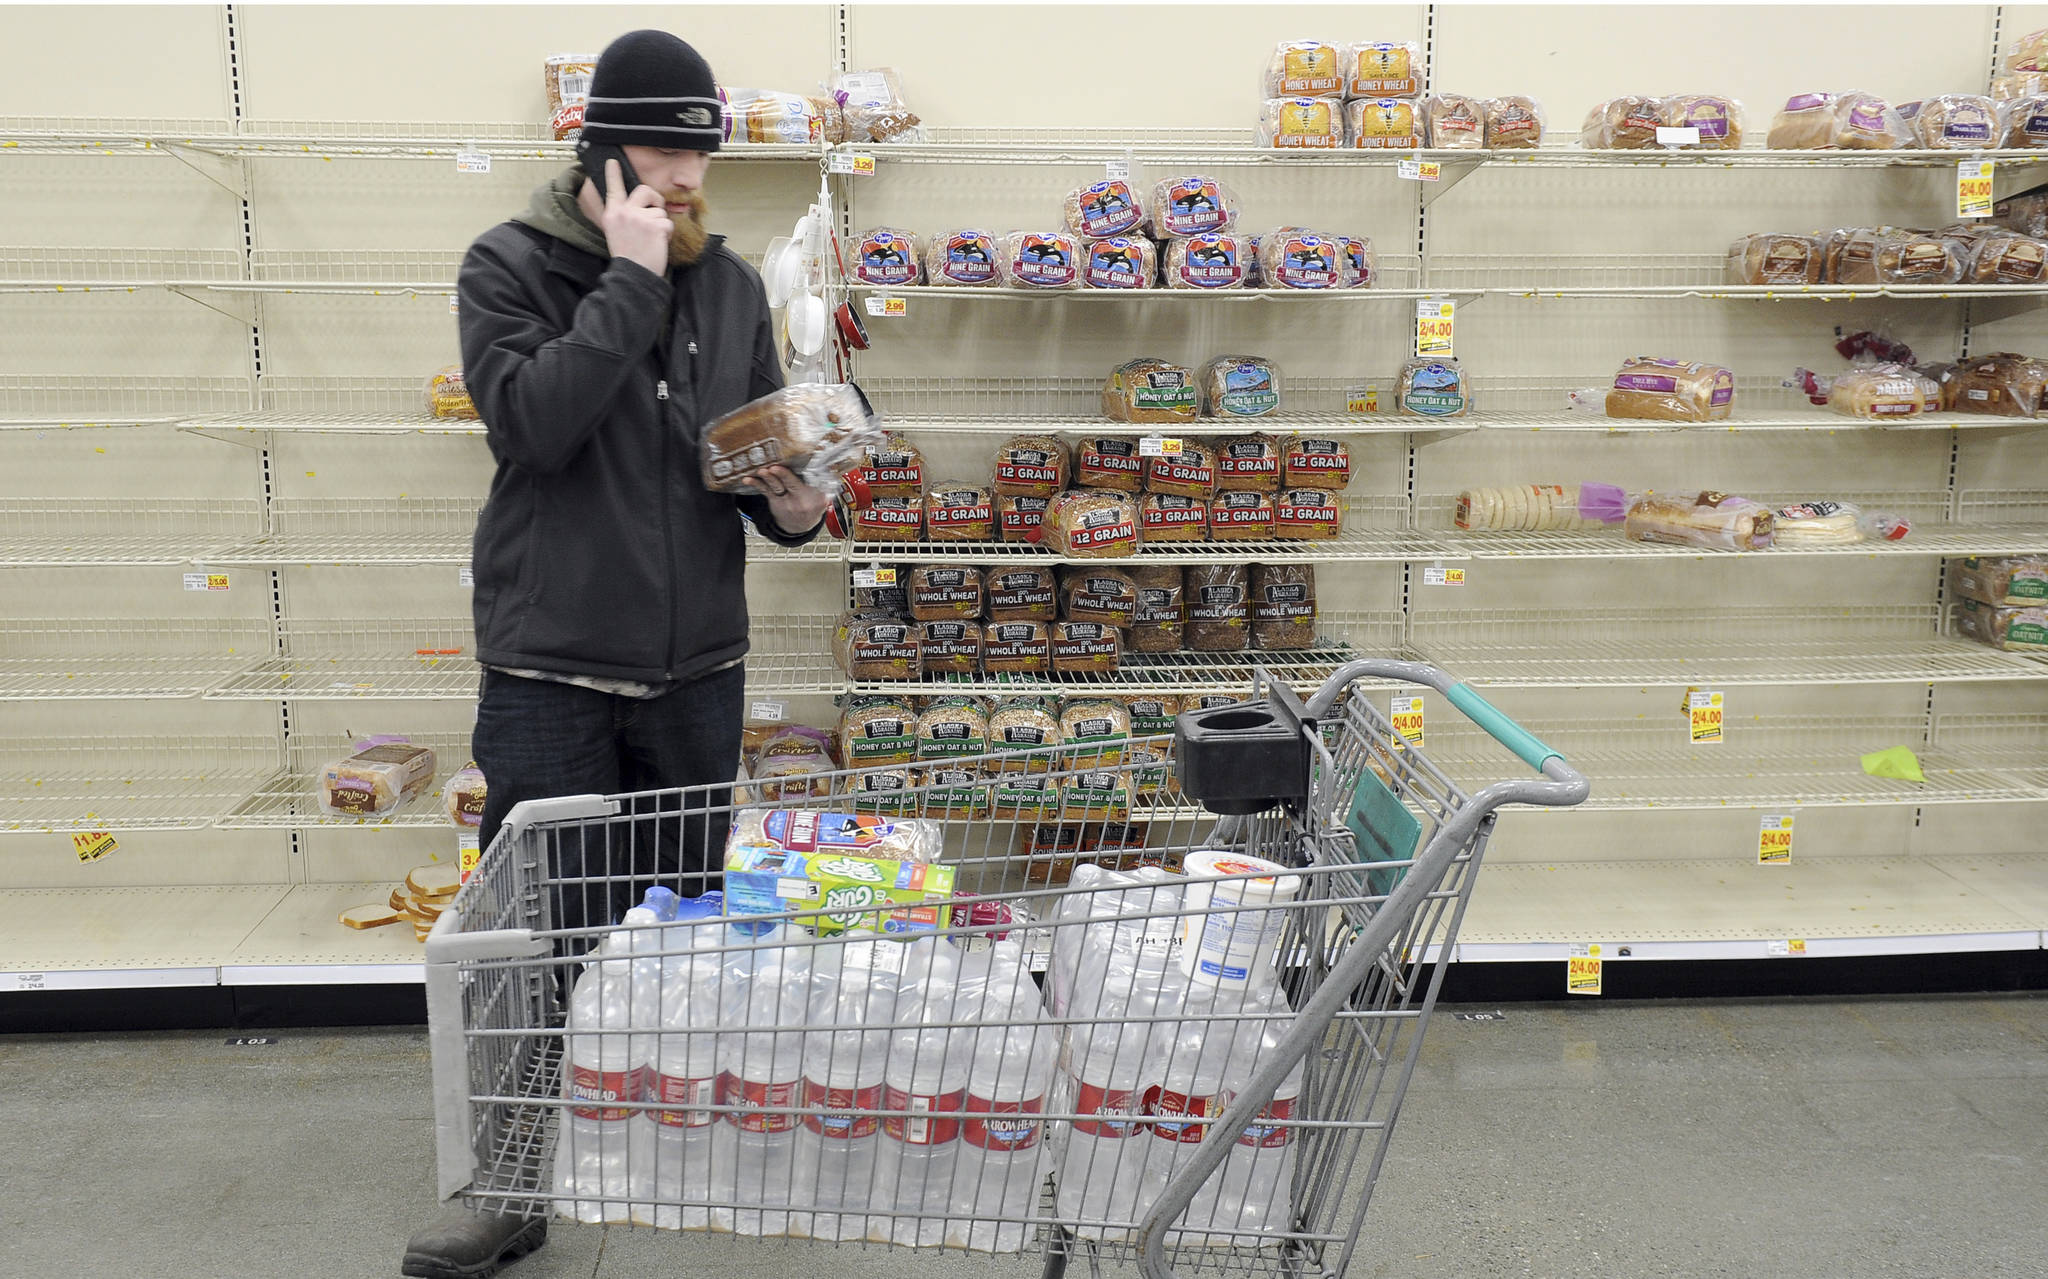 Anchorage resident C.J. Johnson stocks up on water and bread at a local grocery, after the morning’s 7.0-magnitude earthquake which caused extensive damage to the local area in Anchorage, Alaska, Friday, Nov. 30, 2018. The earthquake that shook Anchorage and damaged roadways also knocked many traffic lights out of service and has snarled traffic. (AP Photo/Michael Dinneen)